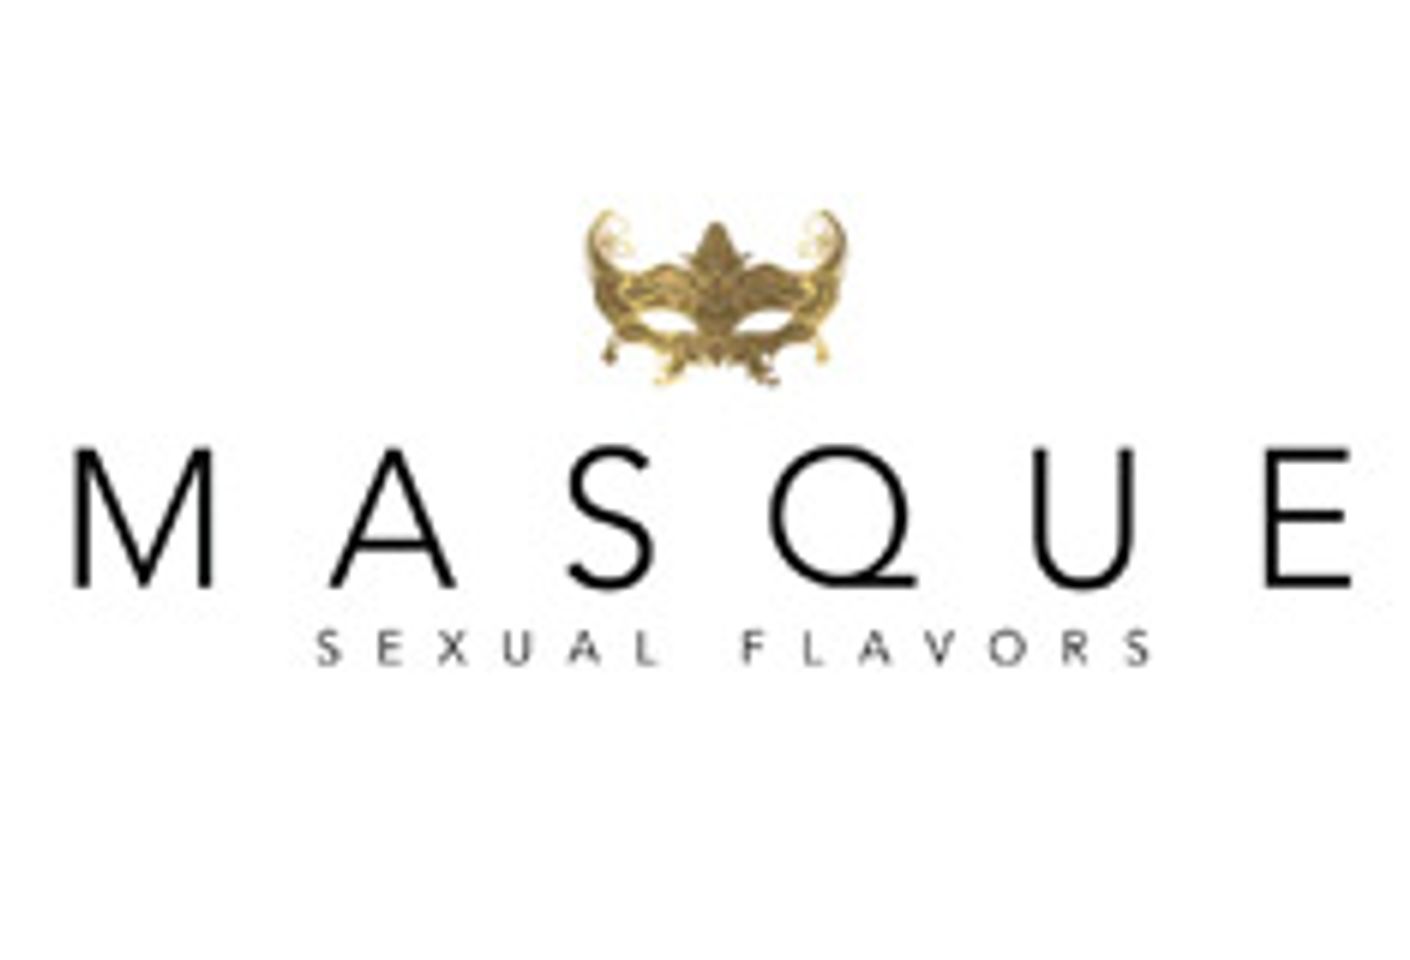 Masque Sexual Flavors Nominated for AVN Award